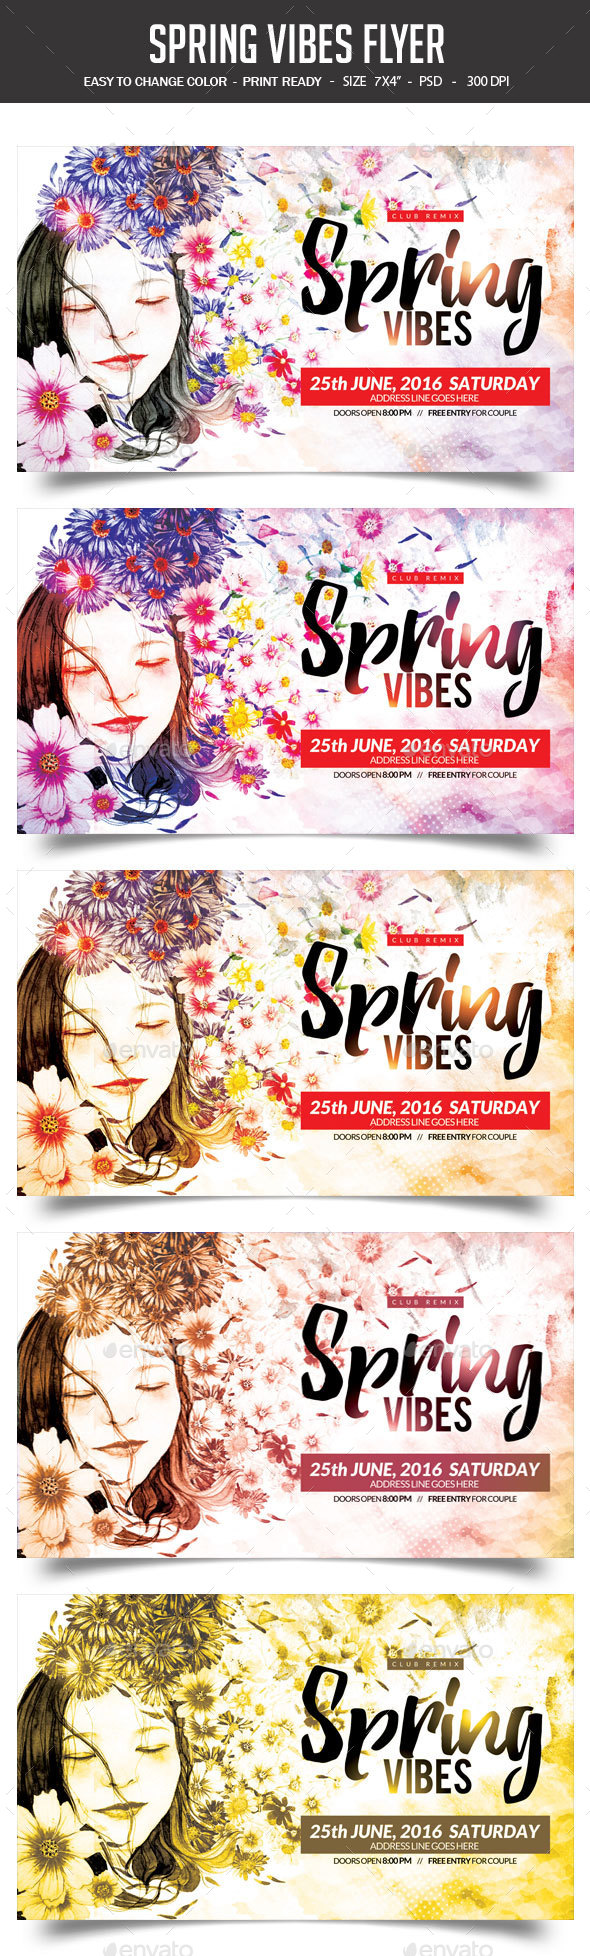 Spring Vibes Flyer